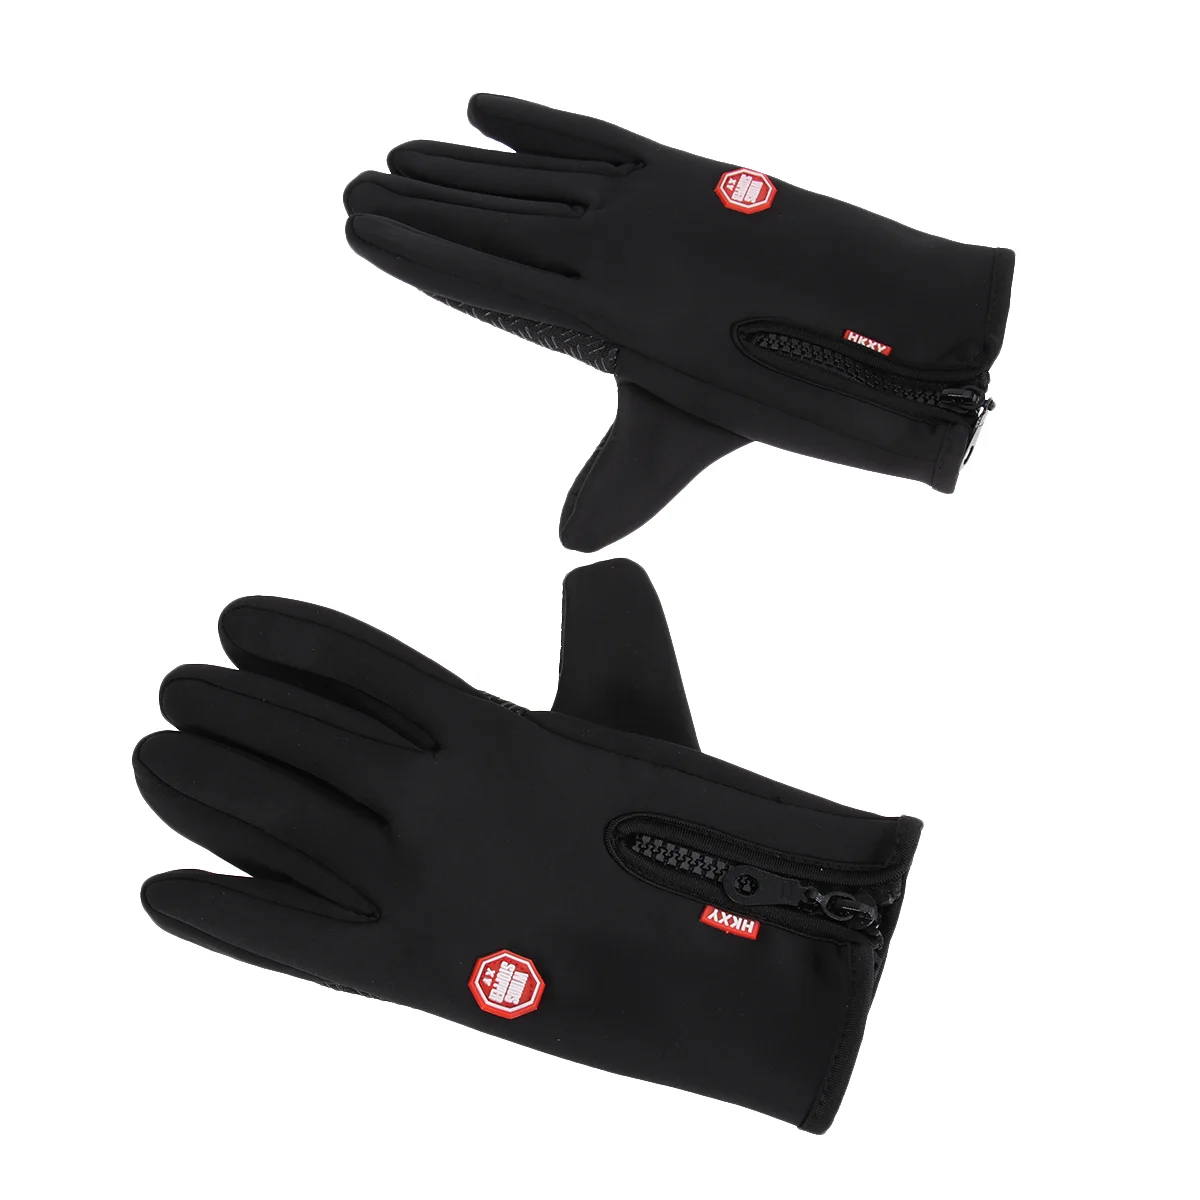 

Windproof Glove Mittens Touch Screen Wrist Gloves Cycling Fashion Full Finger Ski Warm Fleece Lined Outdoor Running Non-slip